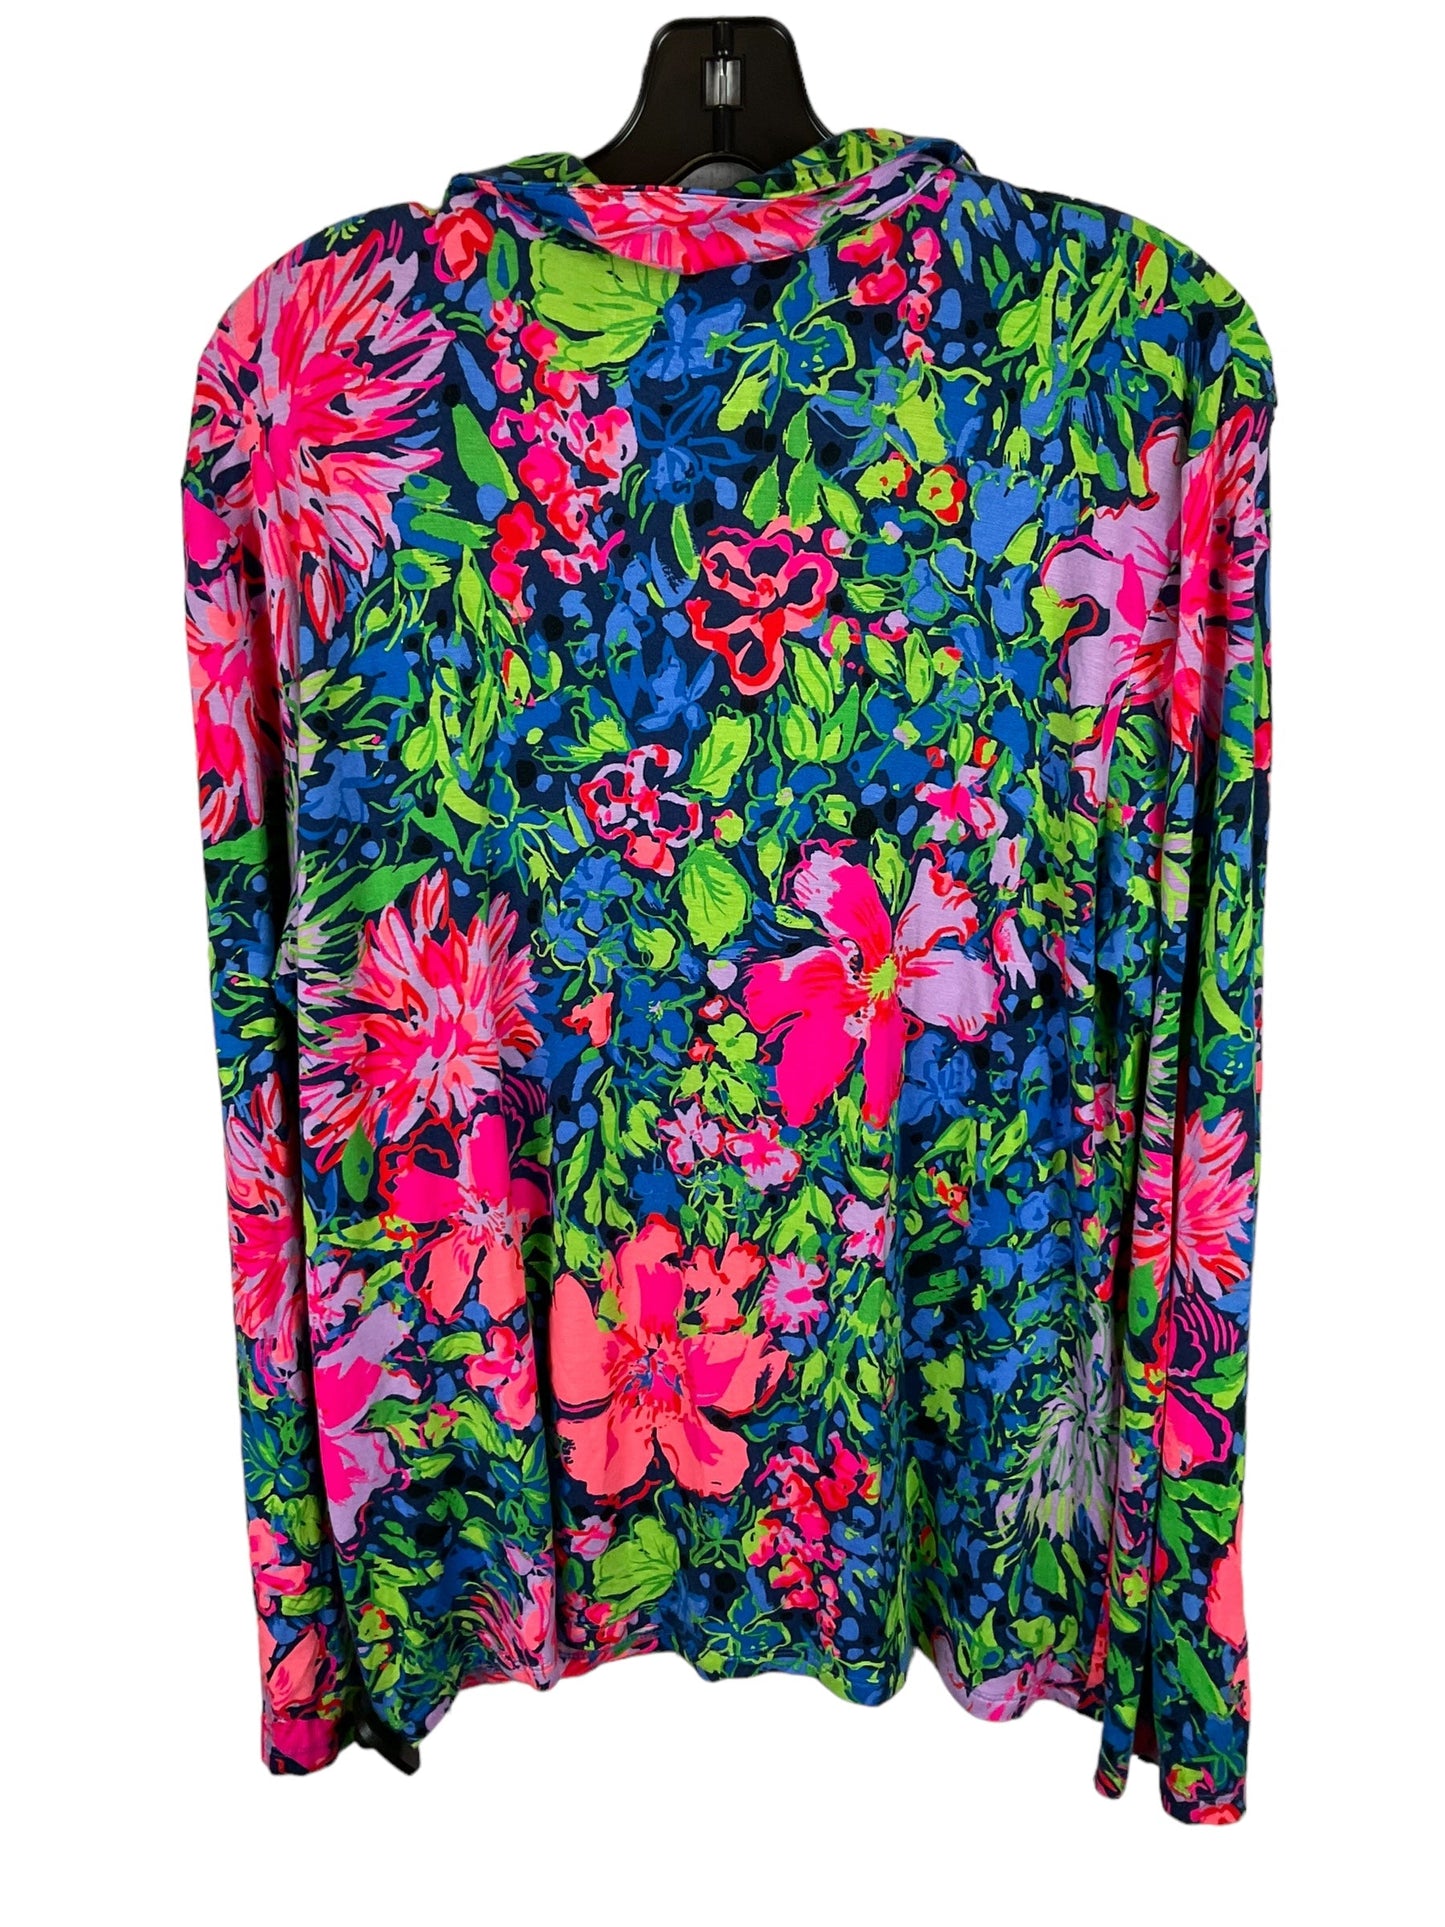 Floral Print Top Long Sleeve Designer Lilly Pulitzer, Size Xl